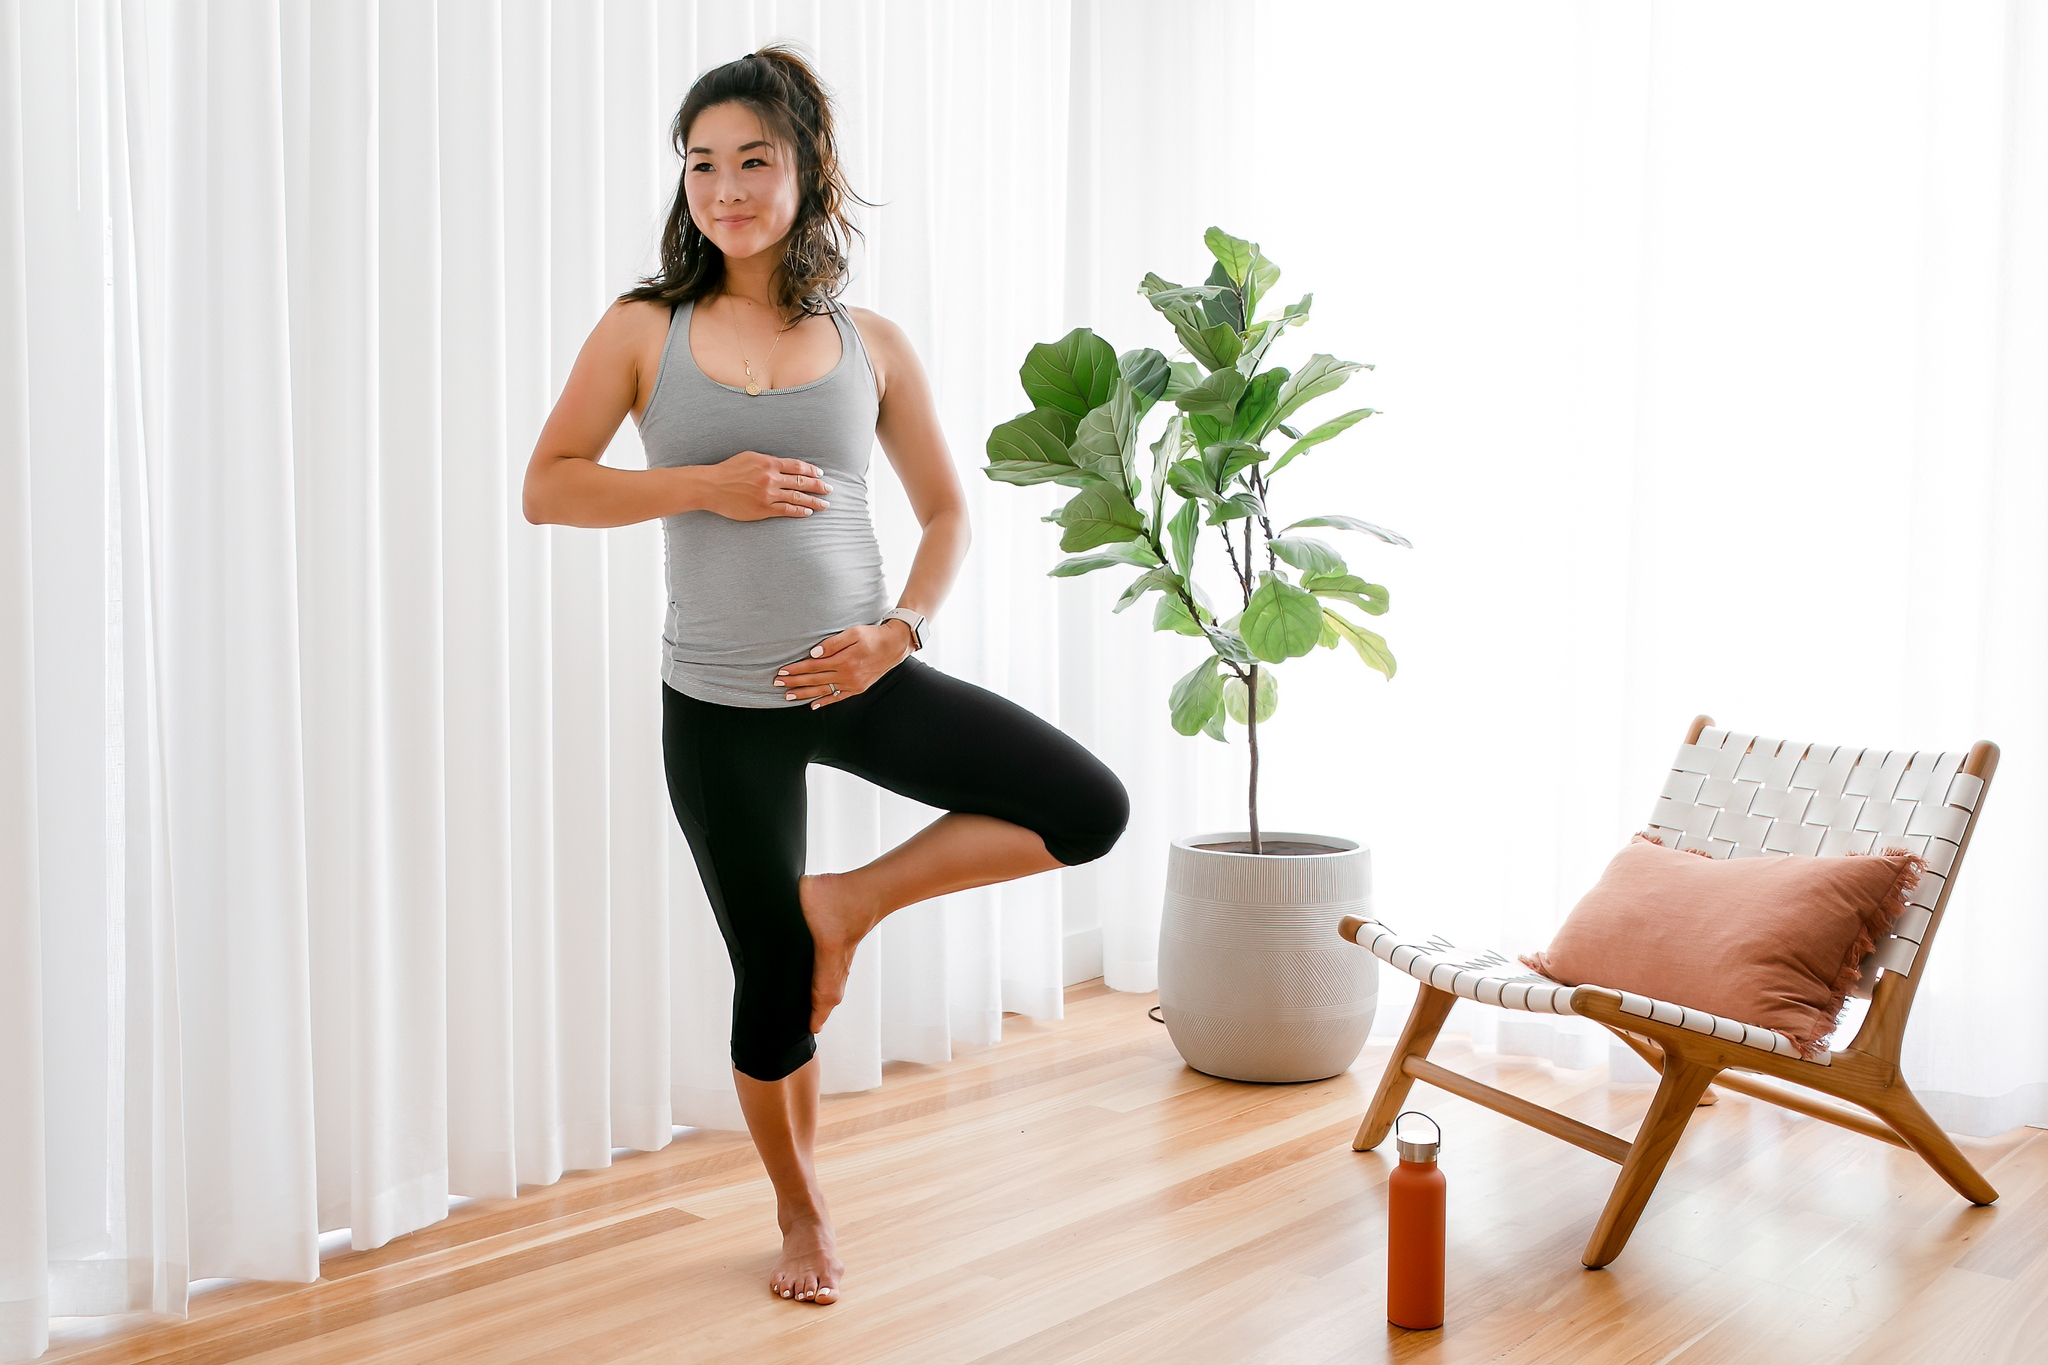 5 weeks pregnant mom-to-be doing stretches